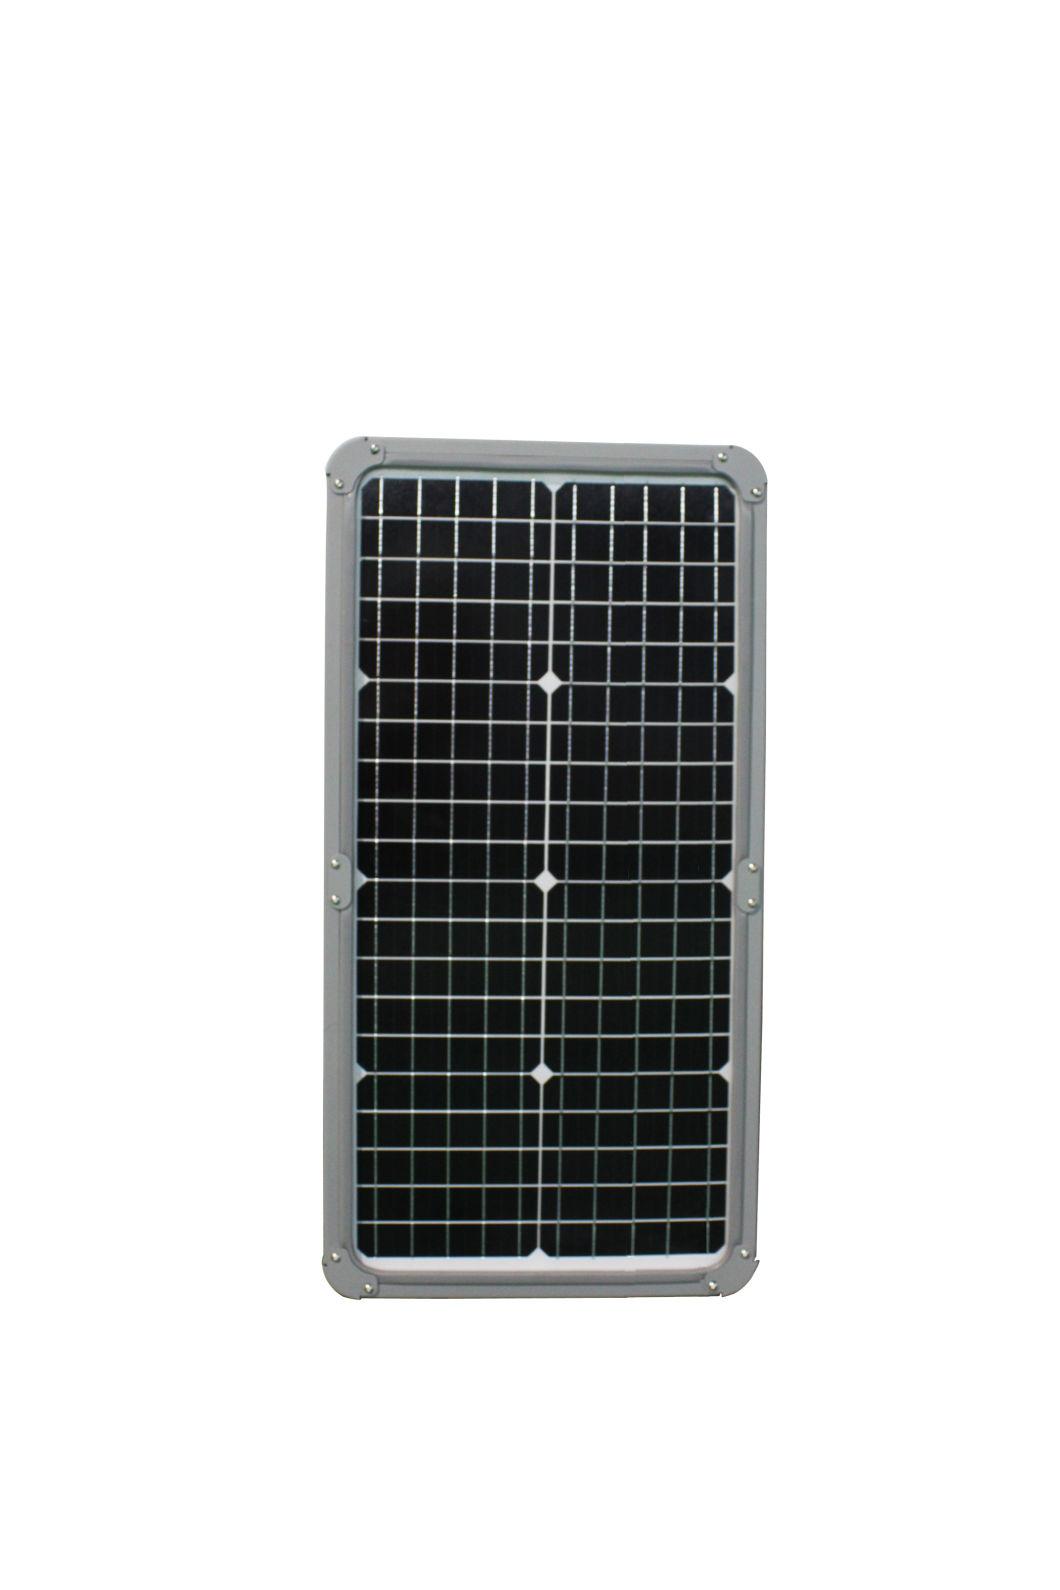 Solar Power LED Street Lights 30W 40W Automatic Smart All in One Illumination in Darknes Outdoor